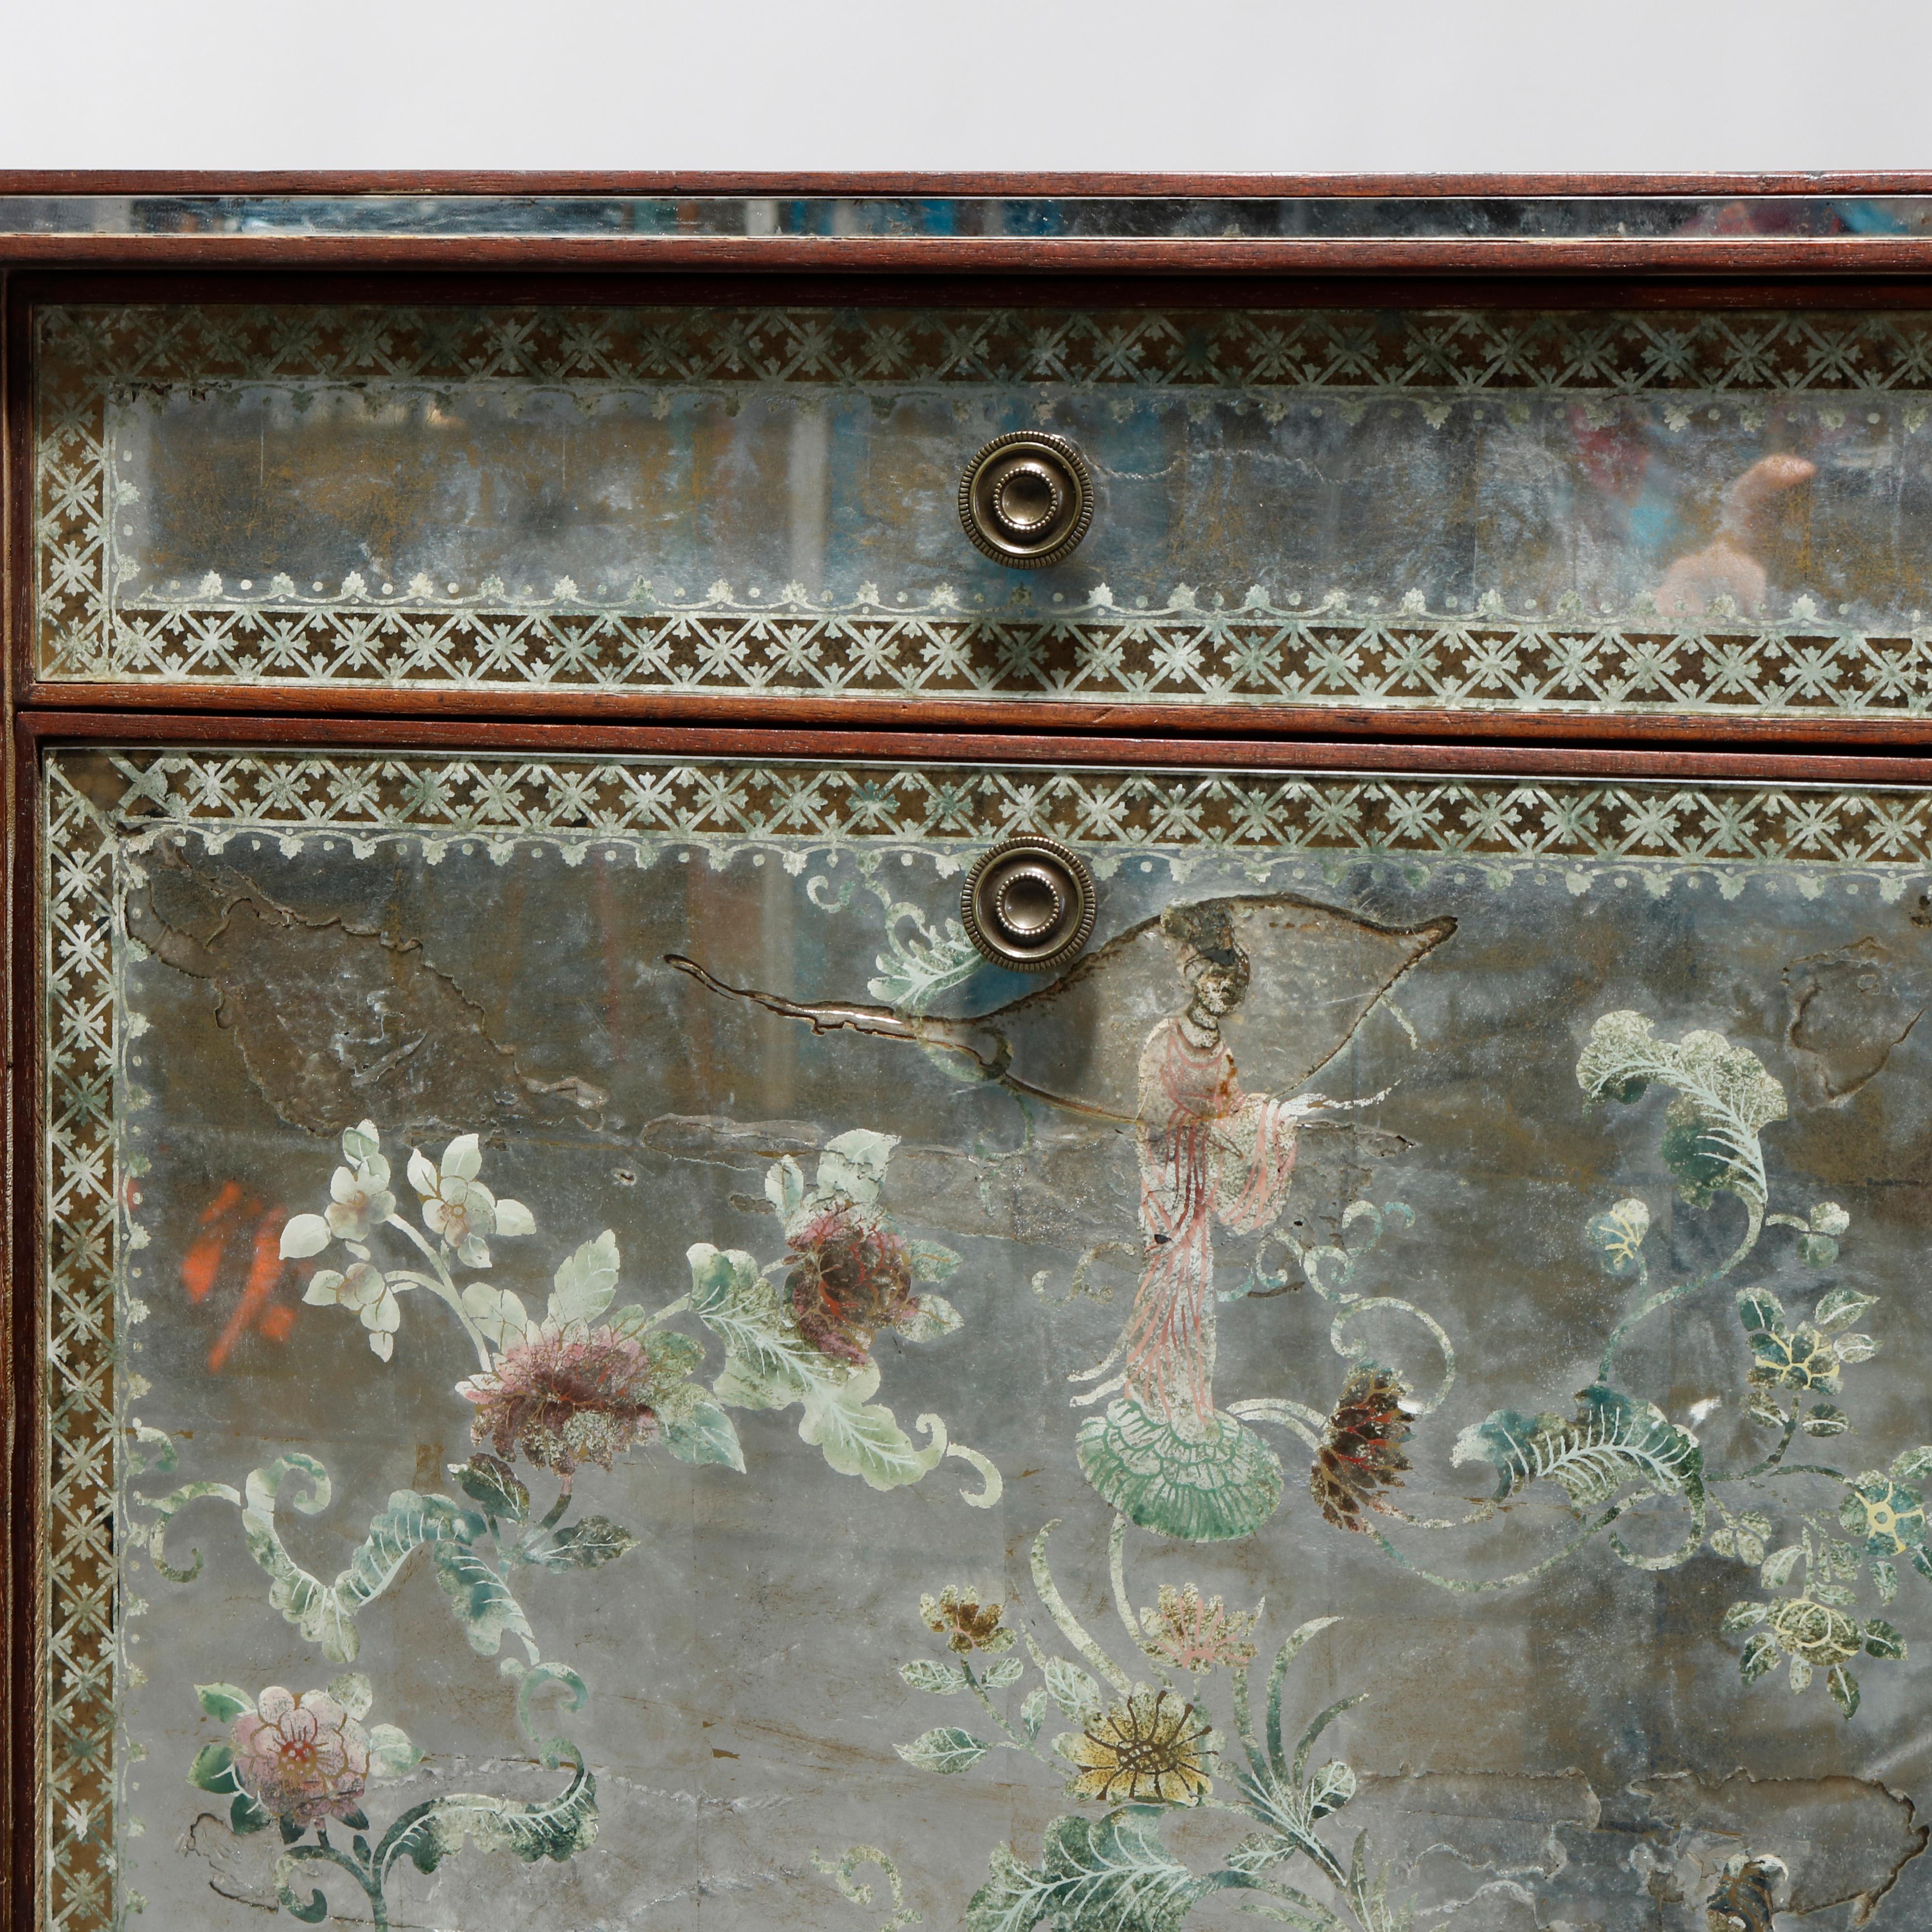 An antique Venetian portfolio side stand offers mirrored facing with Chinoiserie hand painted and gilt garden scene with flowers and Geisha girls, stand with upper drawer over portfolio pull-out compartment, 20th century

Measures: 30.25